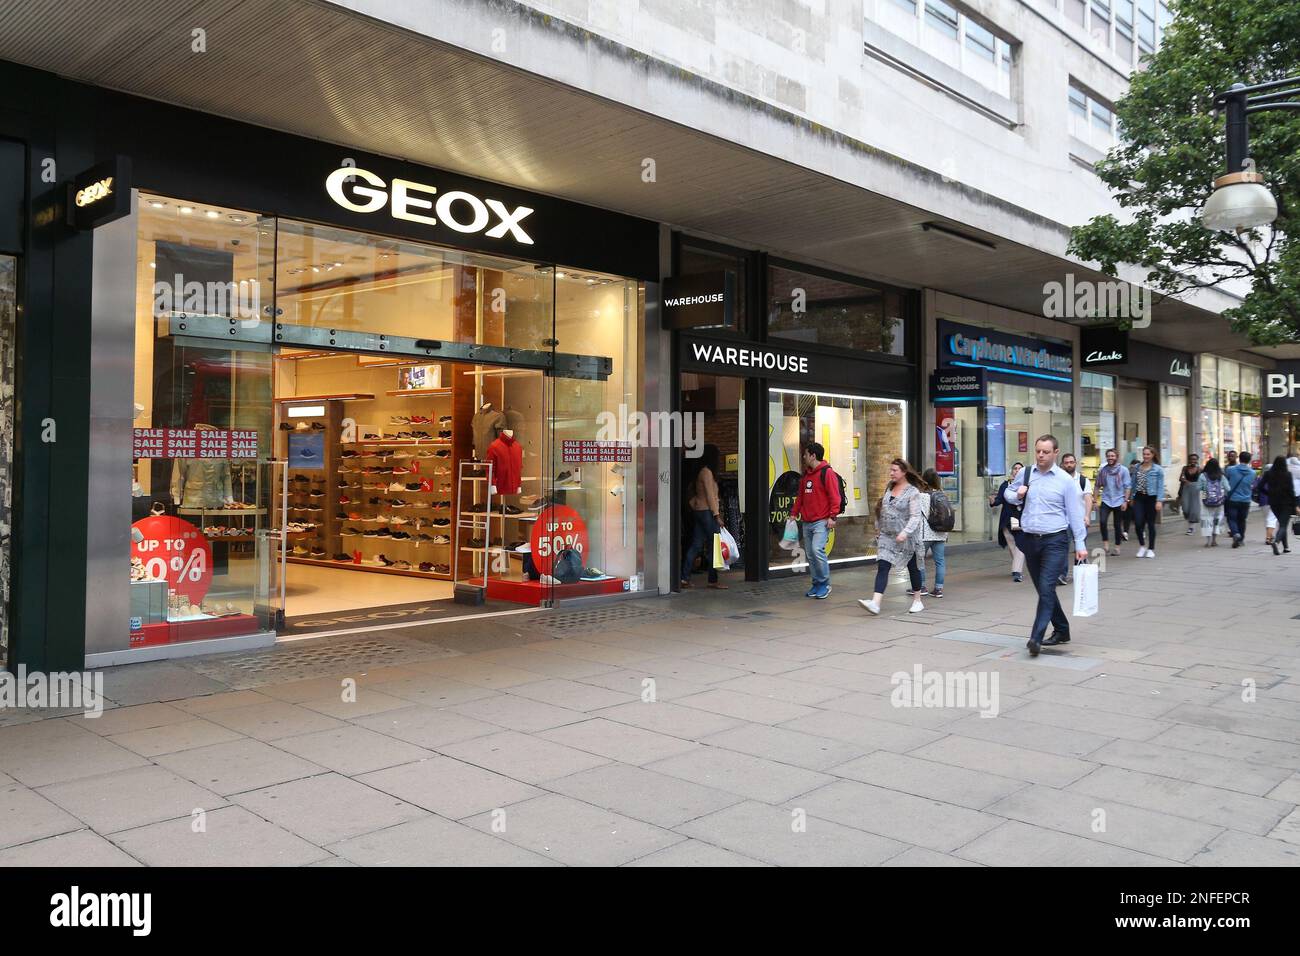 beslag Decimal Desværre LONDON, UK - JULY 6, 2016: People shop at Geox footwear store Oxford Street  in London. Oxford Street has approximately half a million daily visitors a  Stock Photo - Alamy